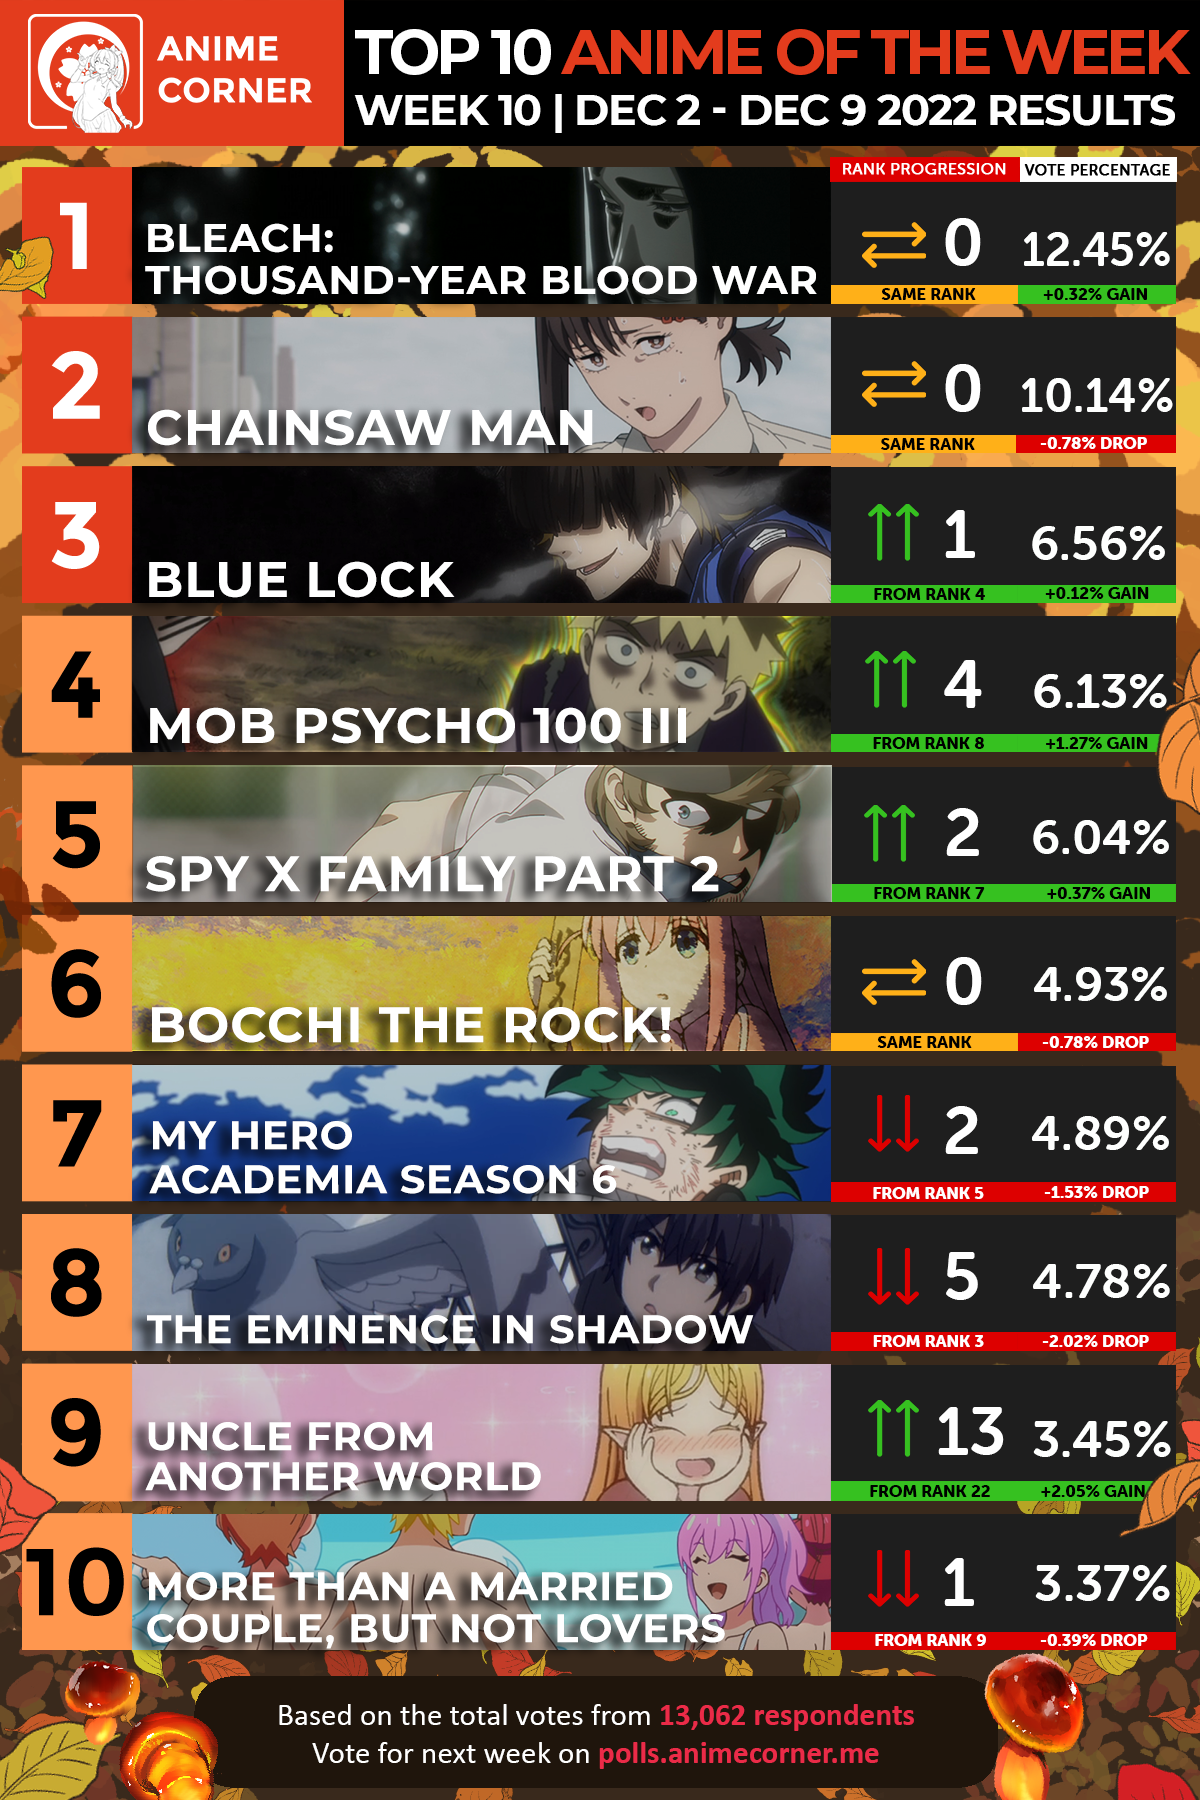 Top 10 Anime of the Week 10 - Fall 2022